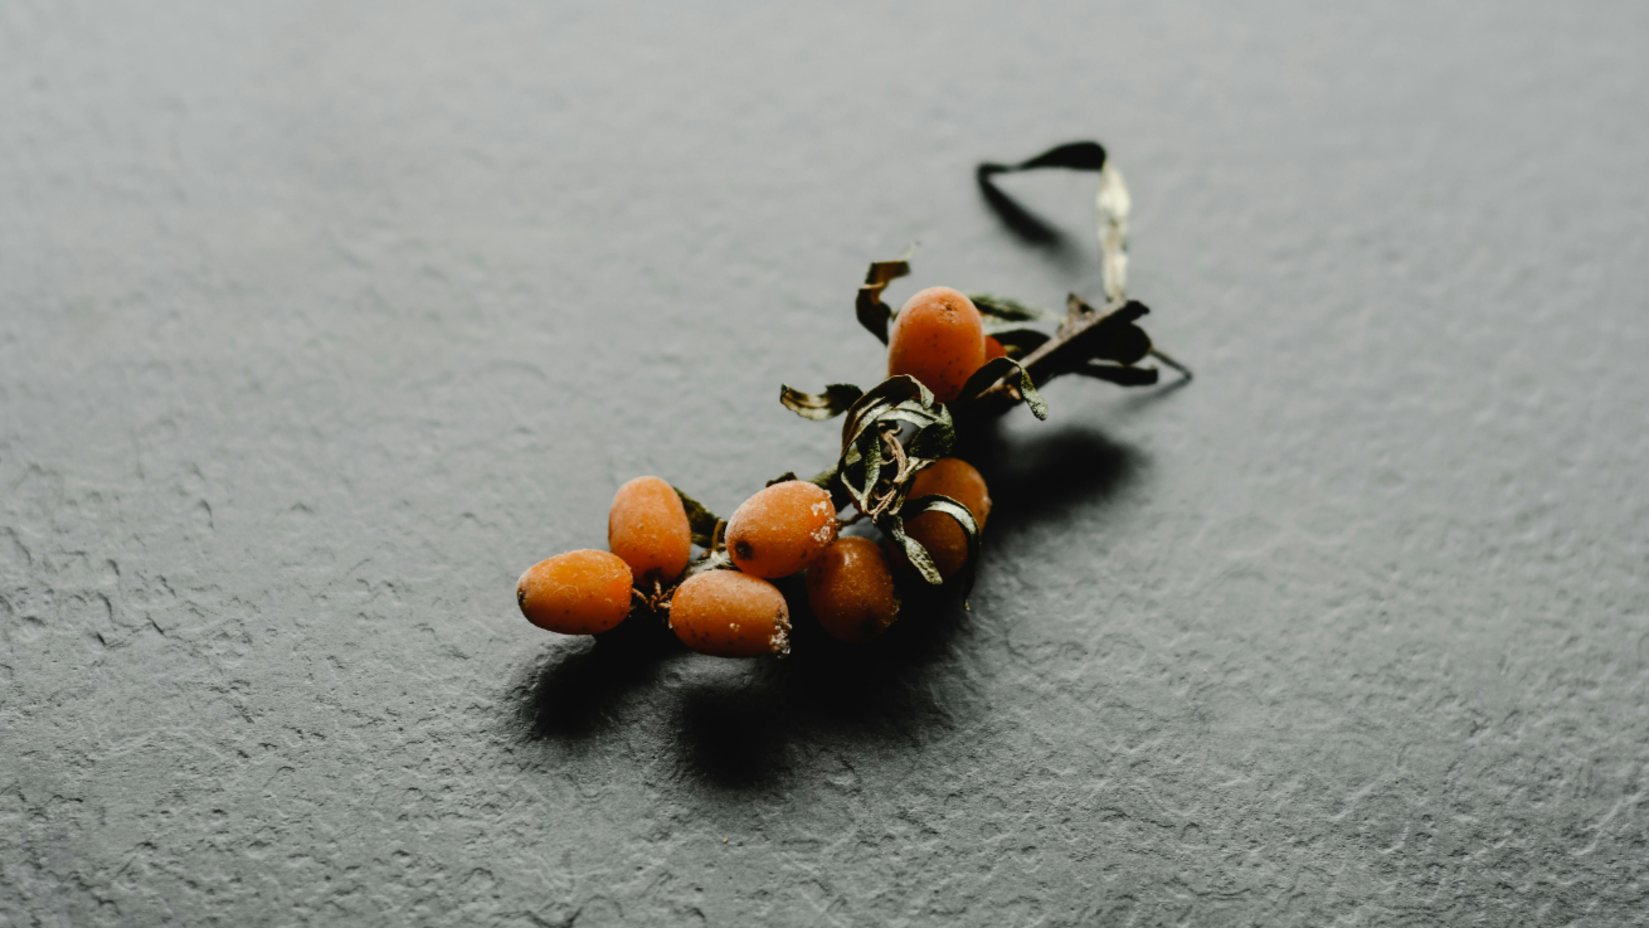 A sparse twig with small orange berries lies on a textured gray background.